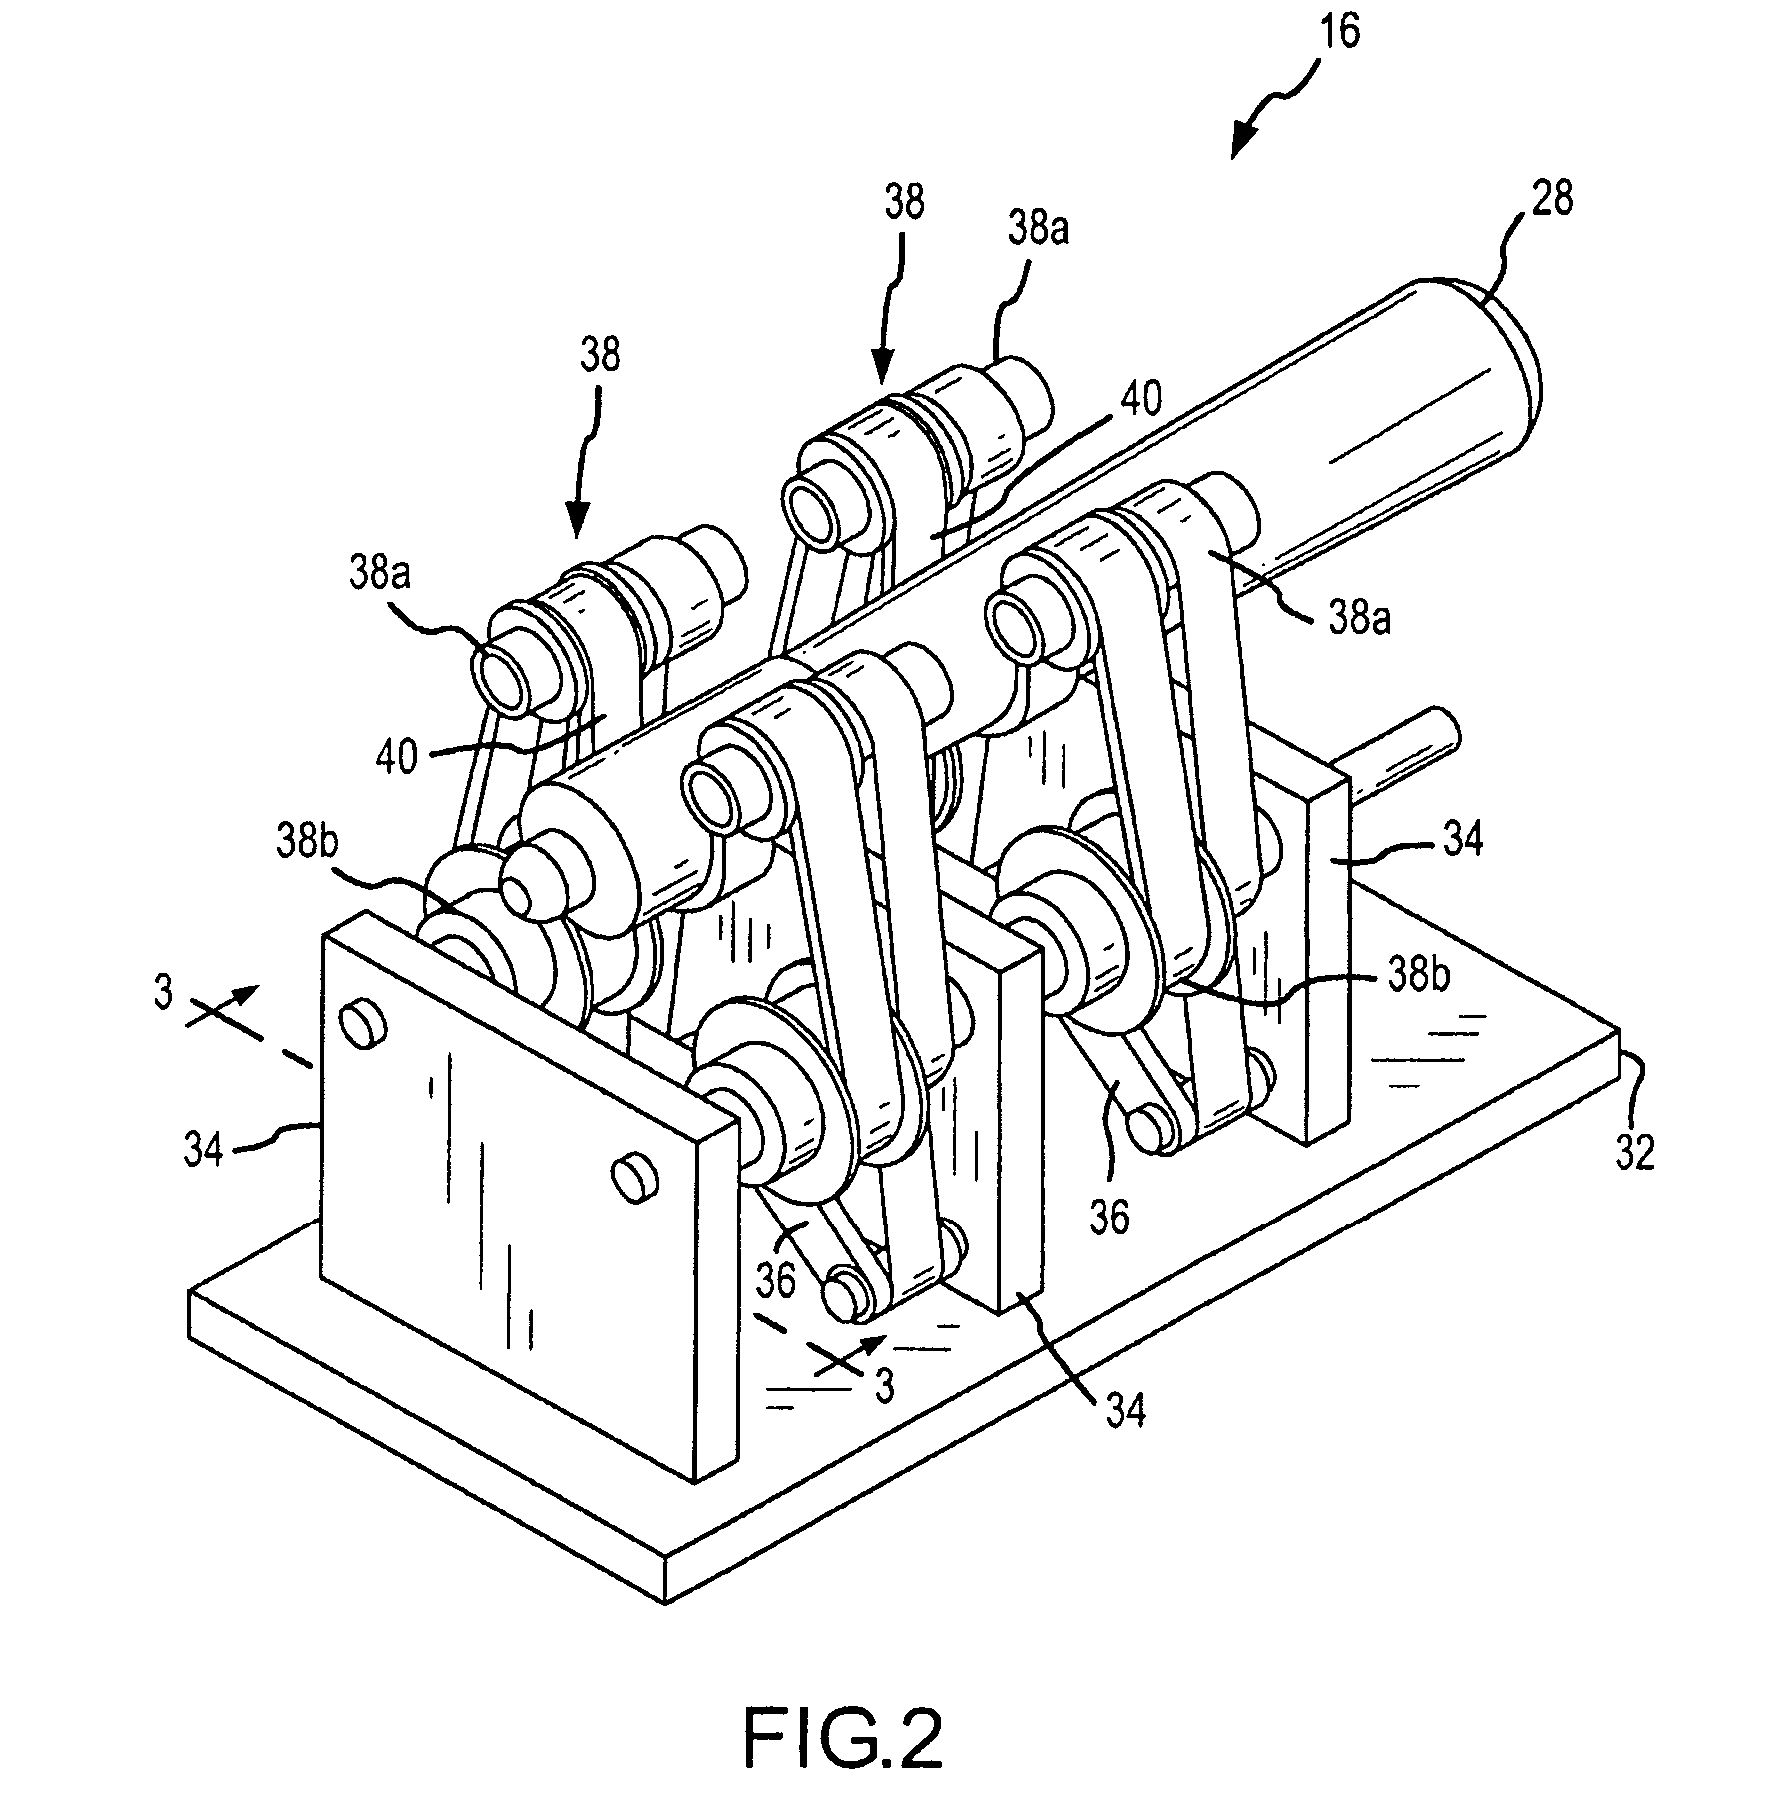 Robotic surgical system and method for surface modeling